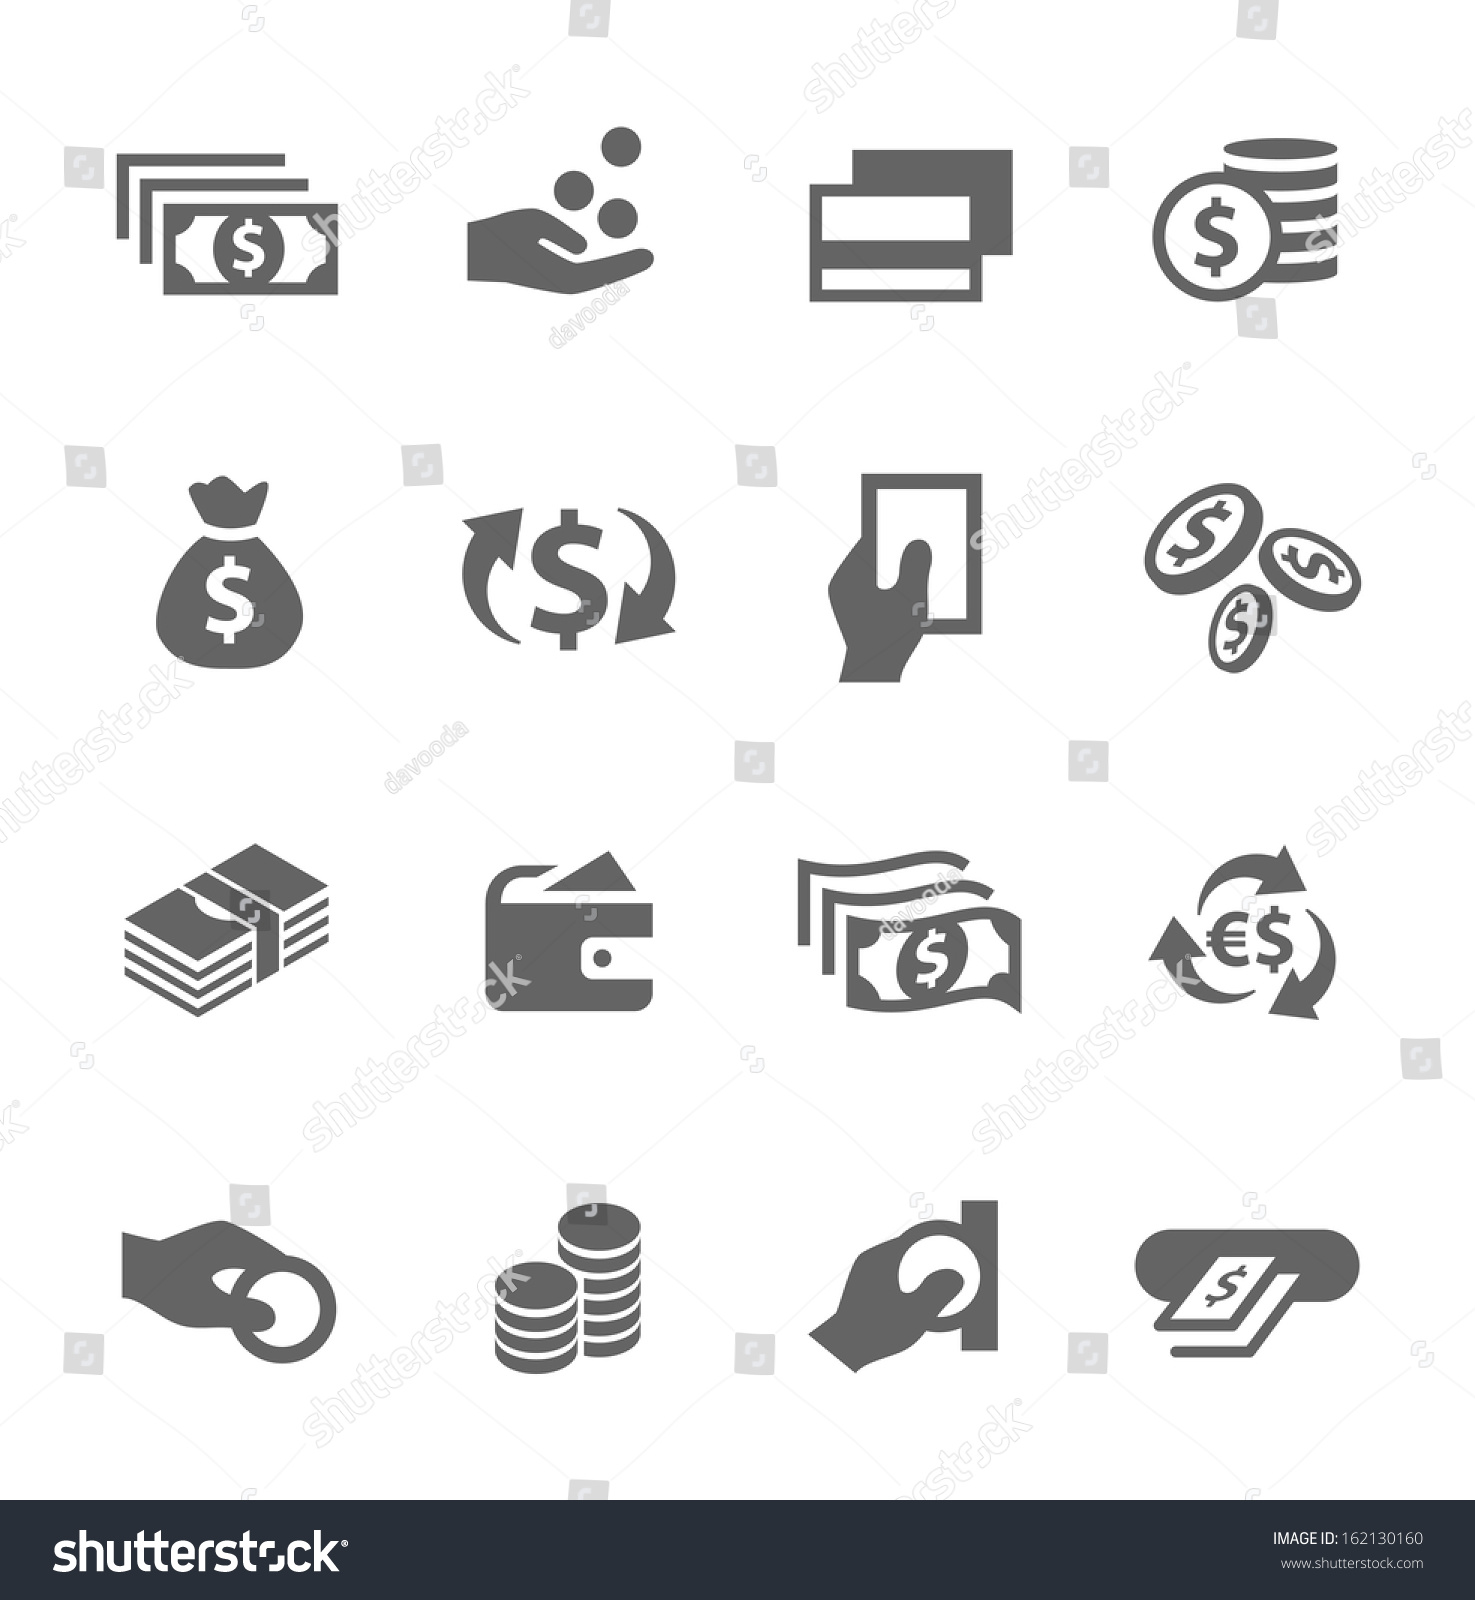 Simple icon set related to Money. A set of sixteen symbols. #162130160